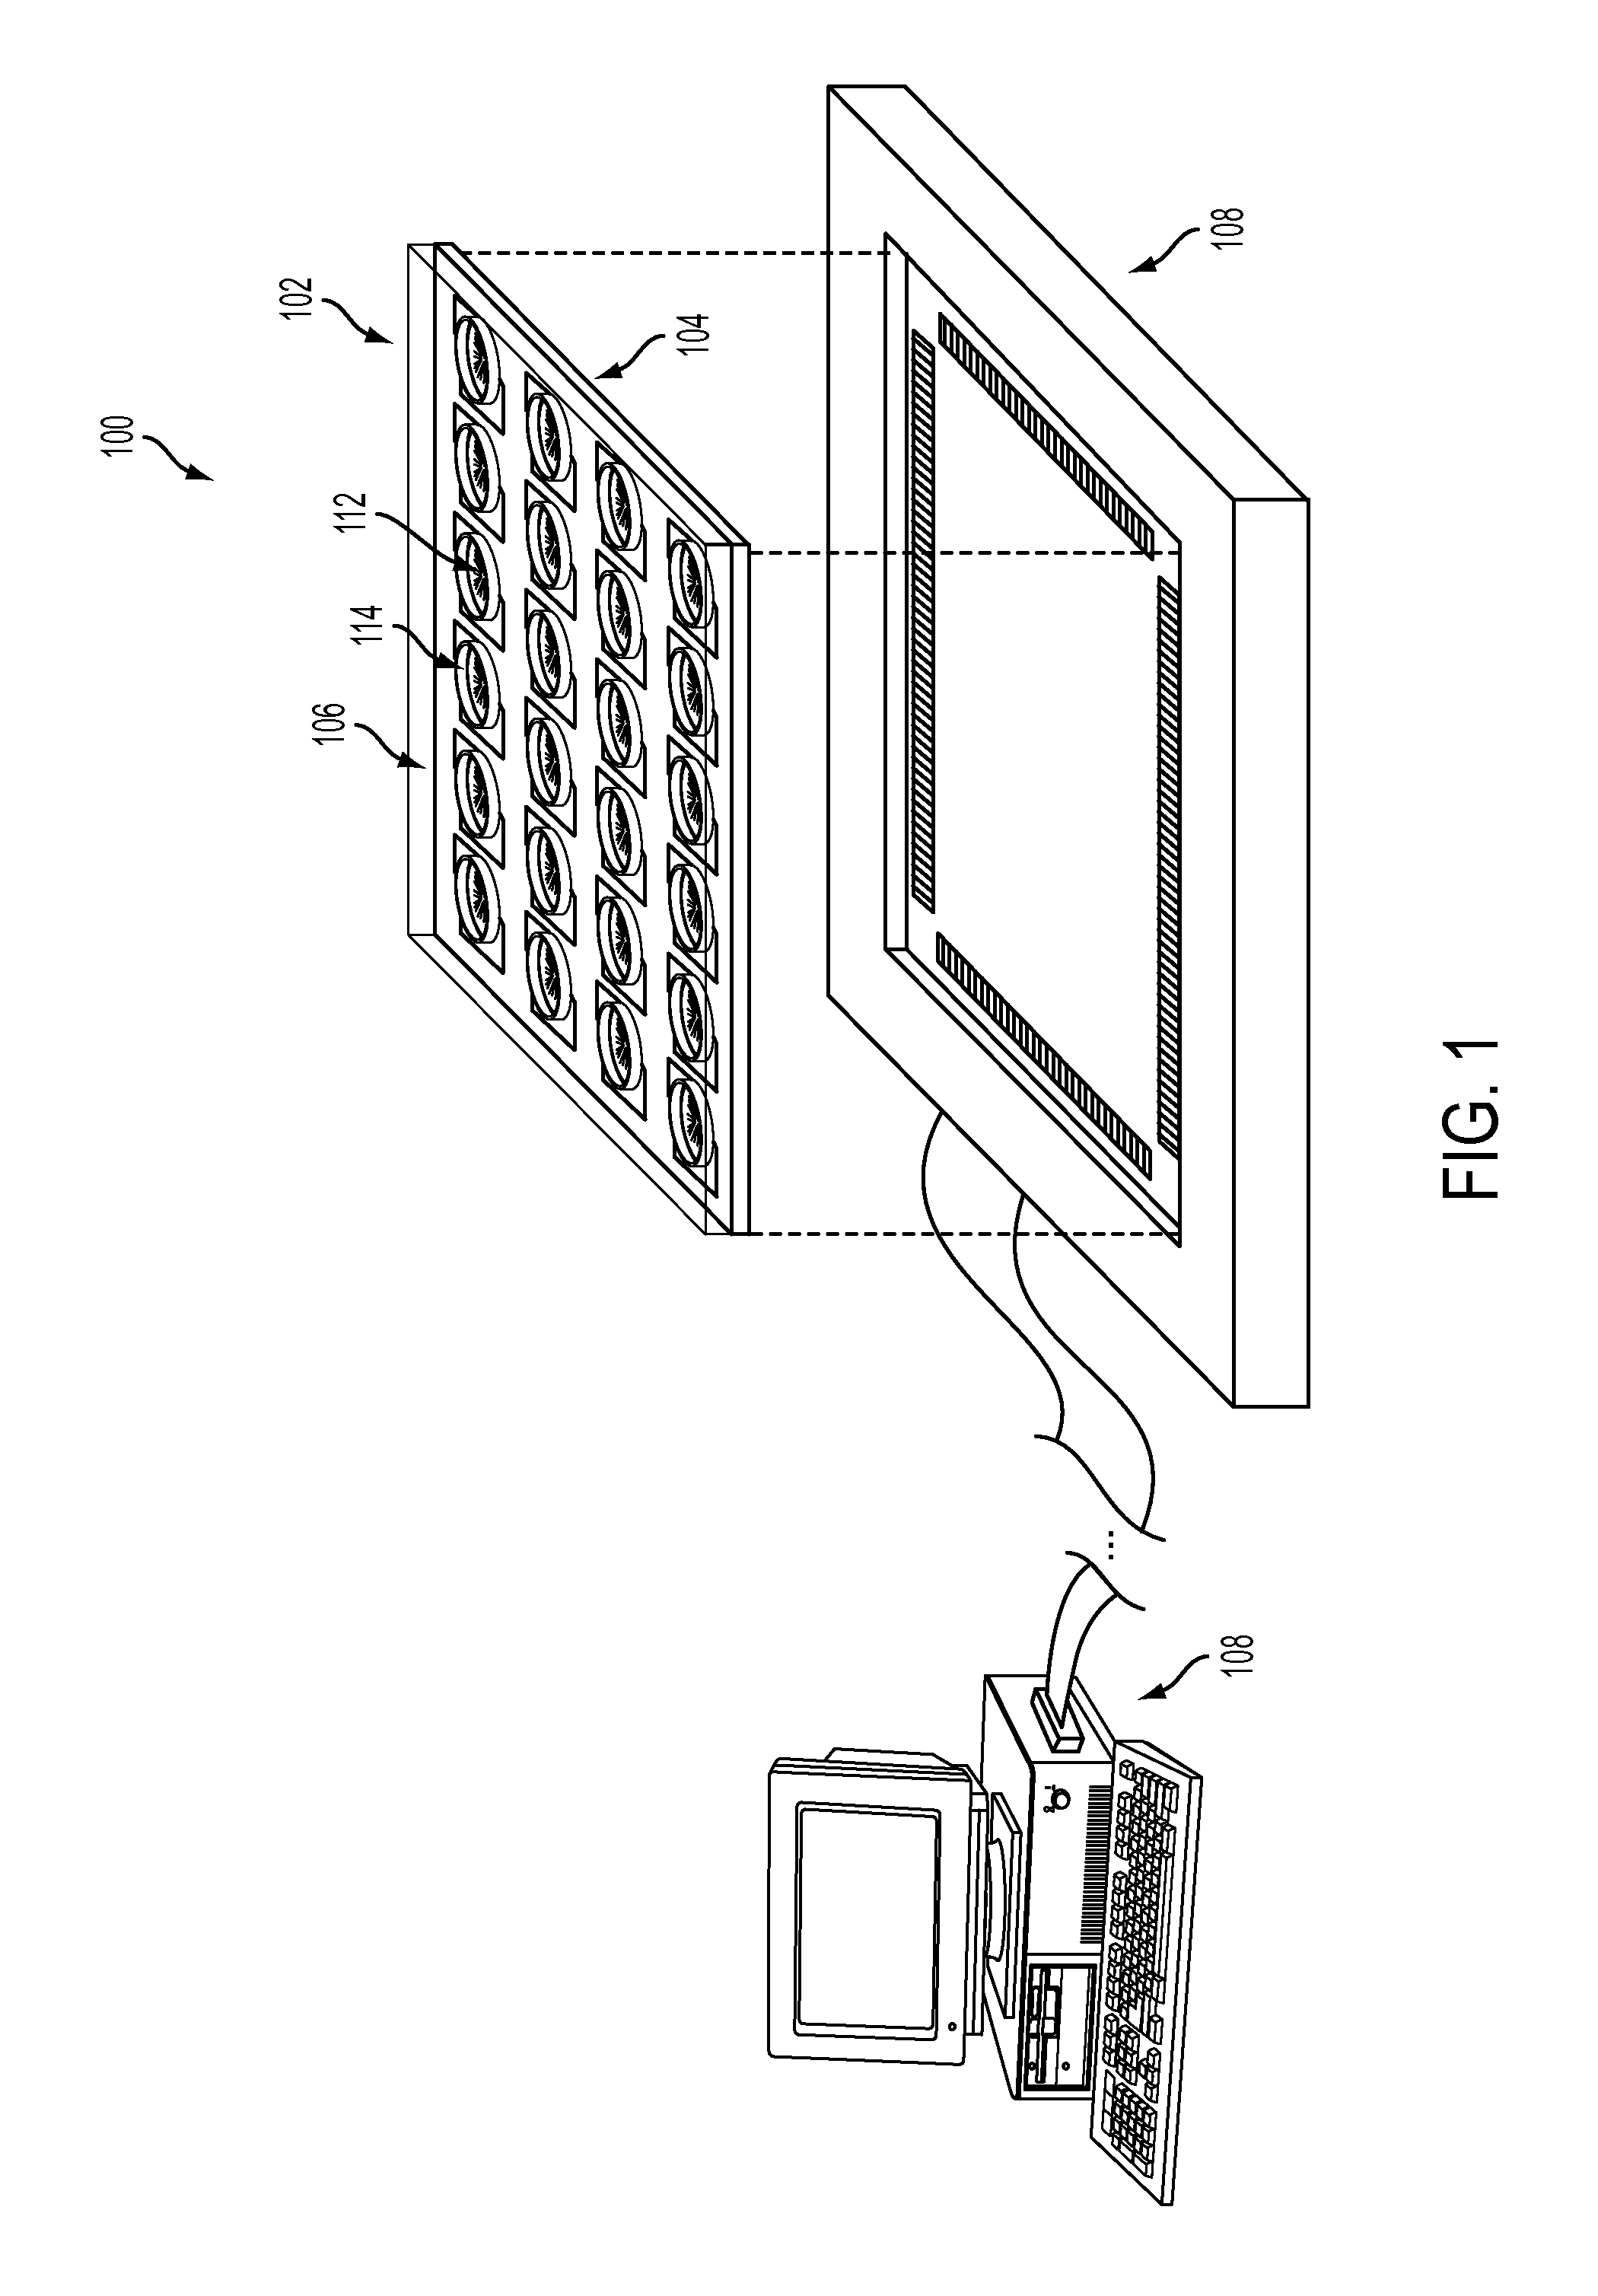 Devices, systems and methods for high-throughput electrophysiology